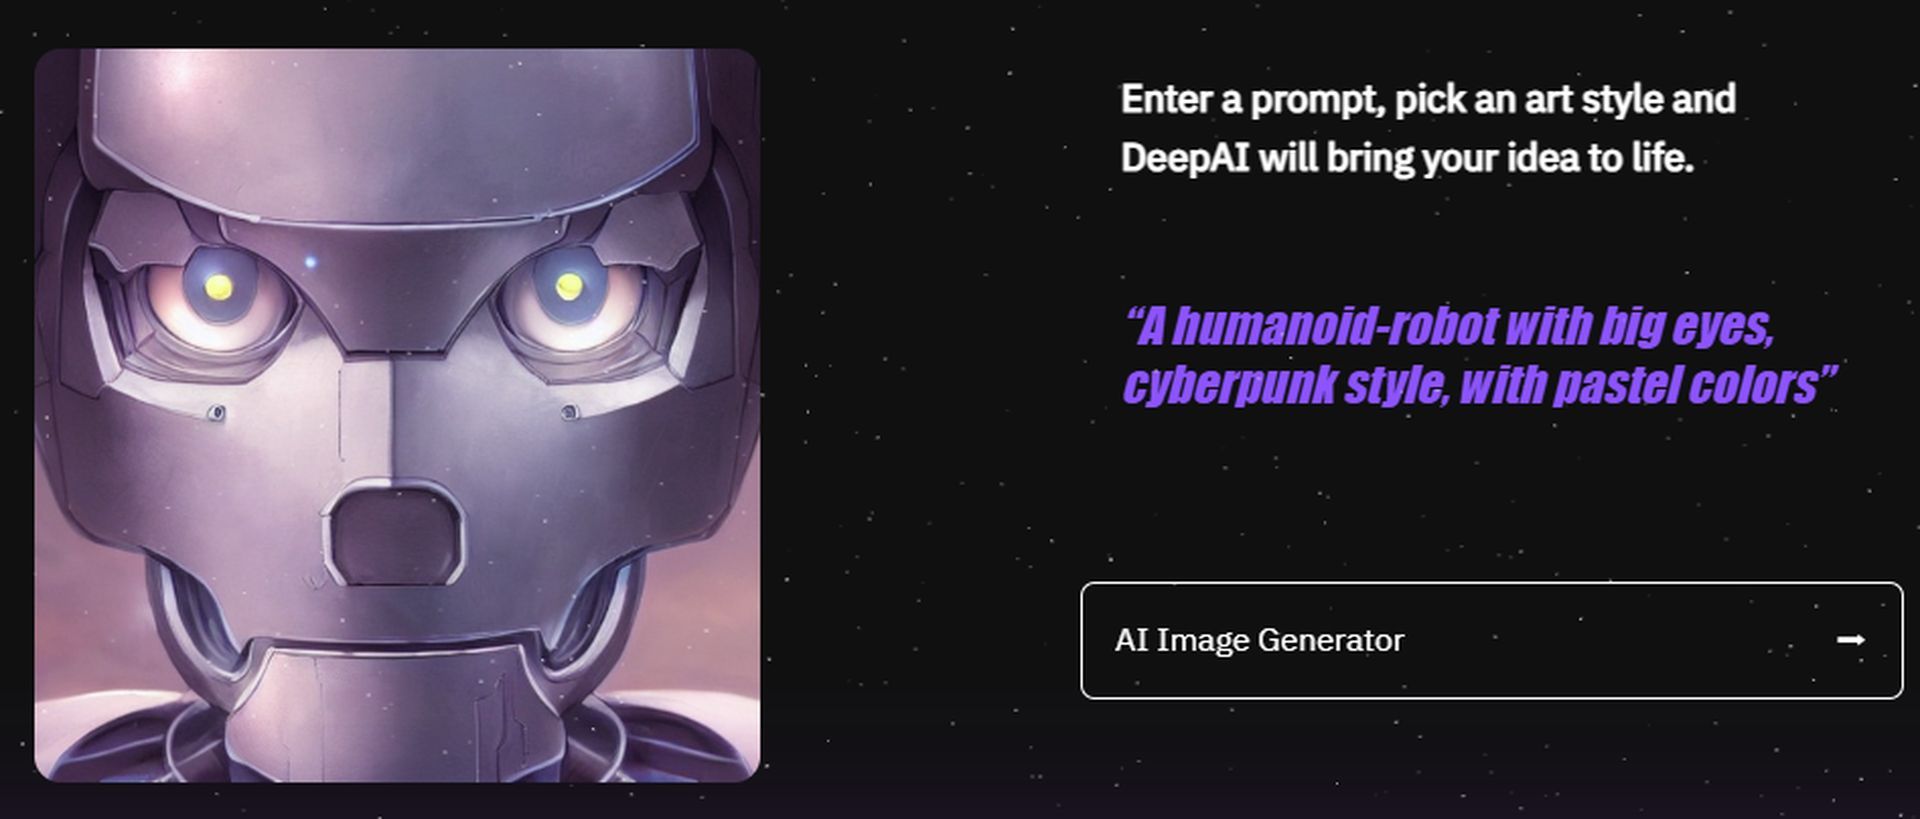 DeepAI: Unleash your creativity with AI-powered tools for images, content, games and more. Accessible, innovative, and free. Explore it now!